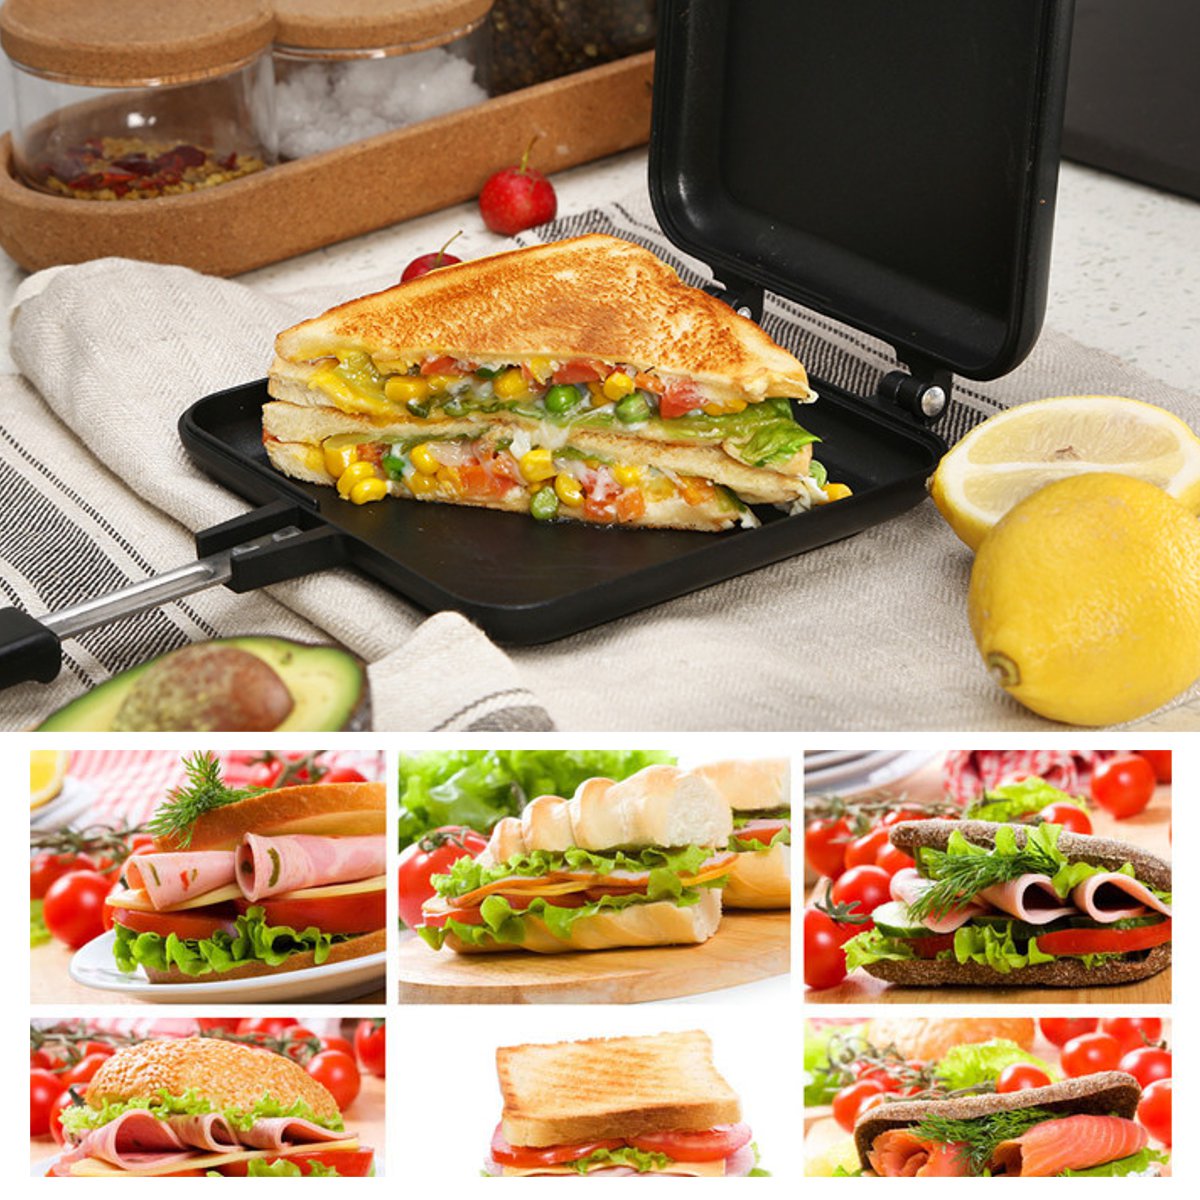 Household-Sandwich-Maker-Double-Sided-Cake-Bread-Toaster-Non-Stick-Pan-Mould-1485855